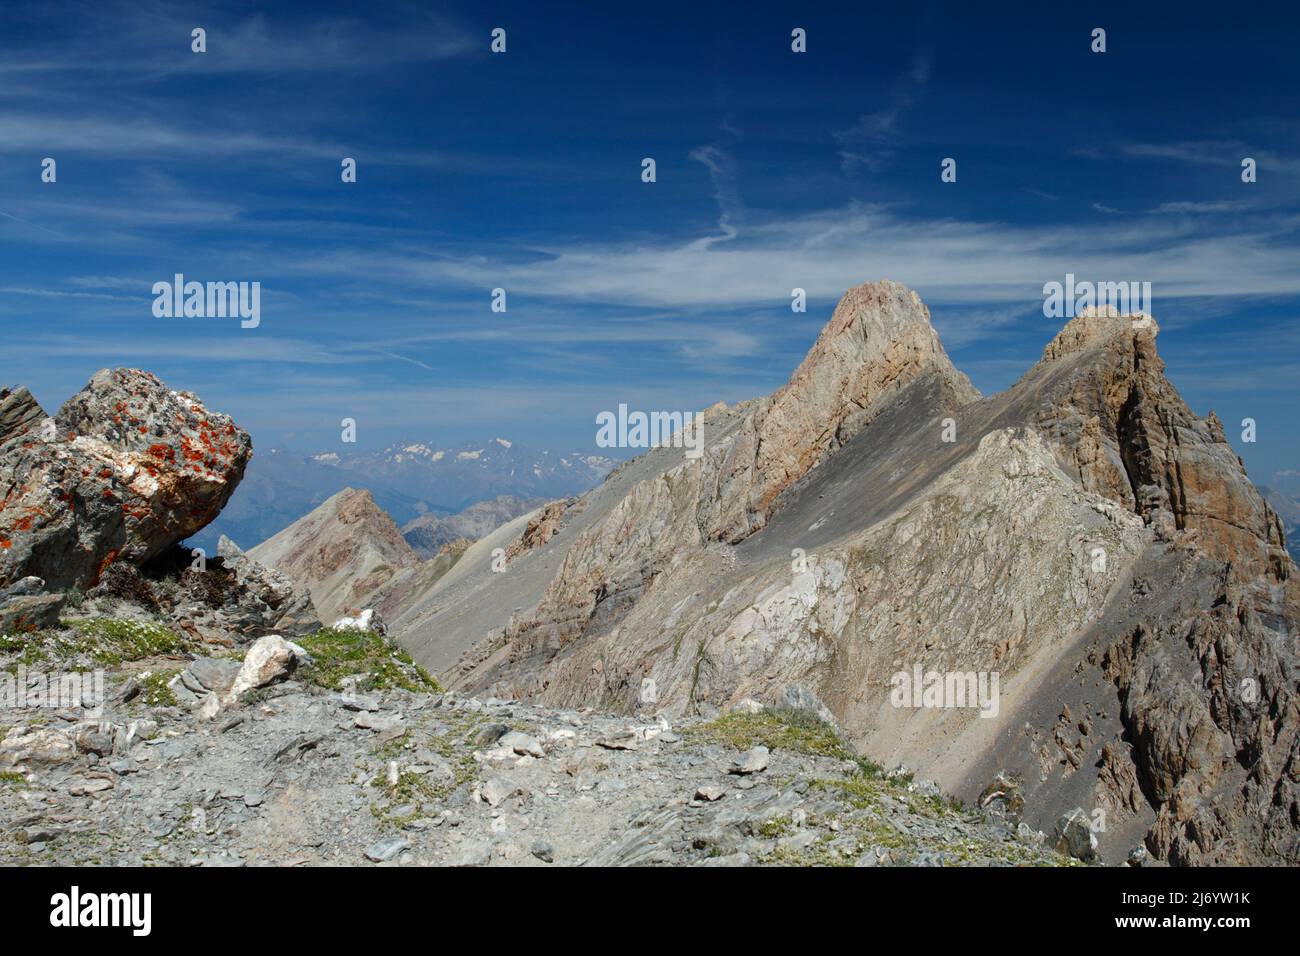 High mountain landscape in the french alps Stock Photo